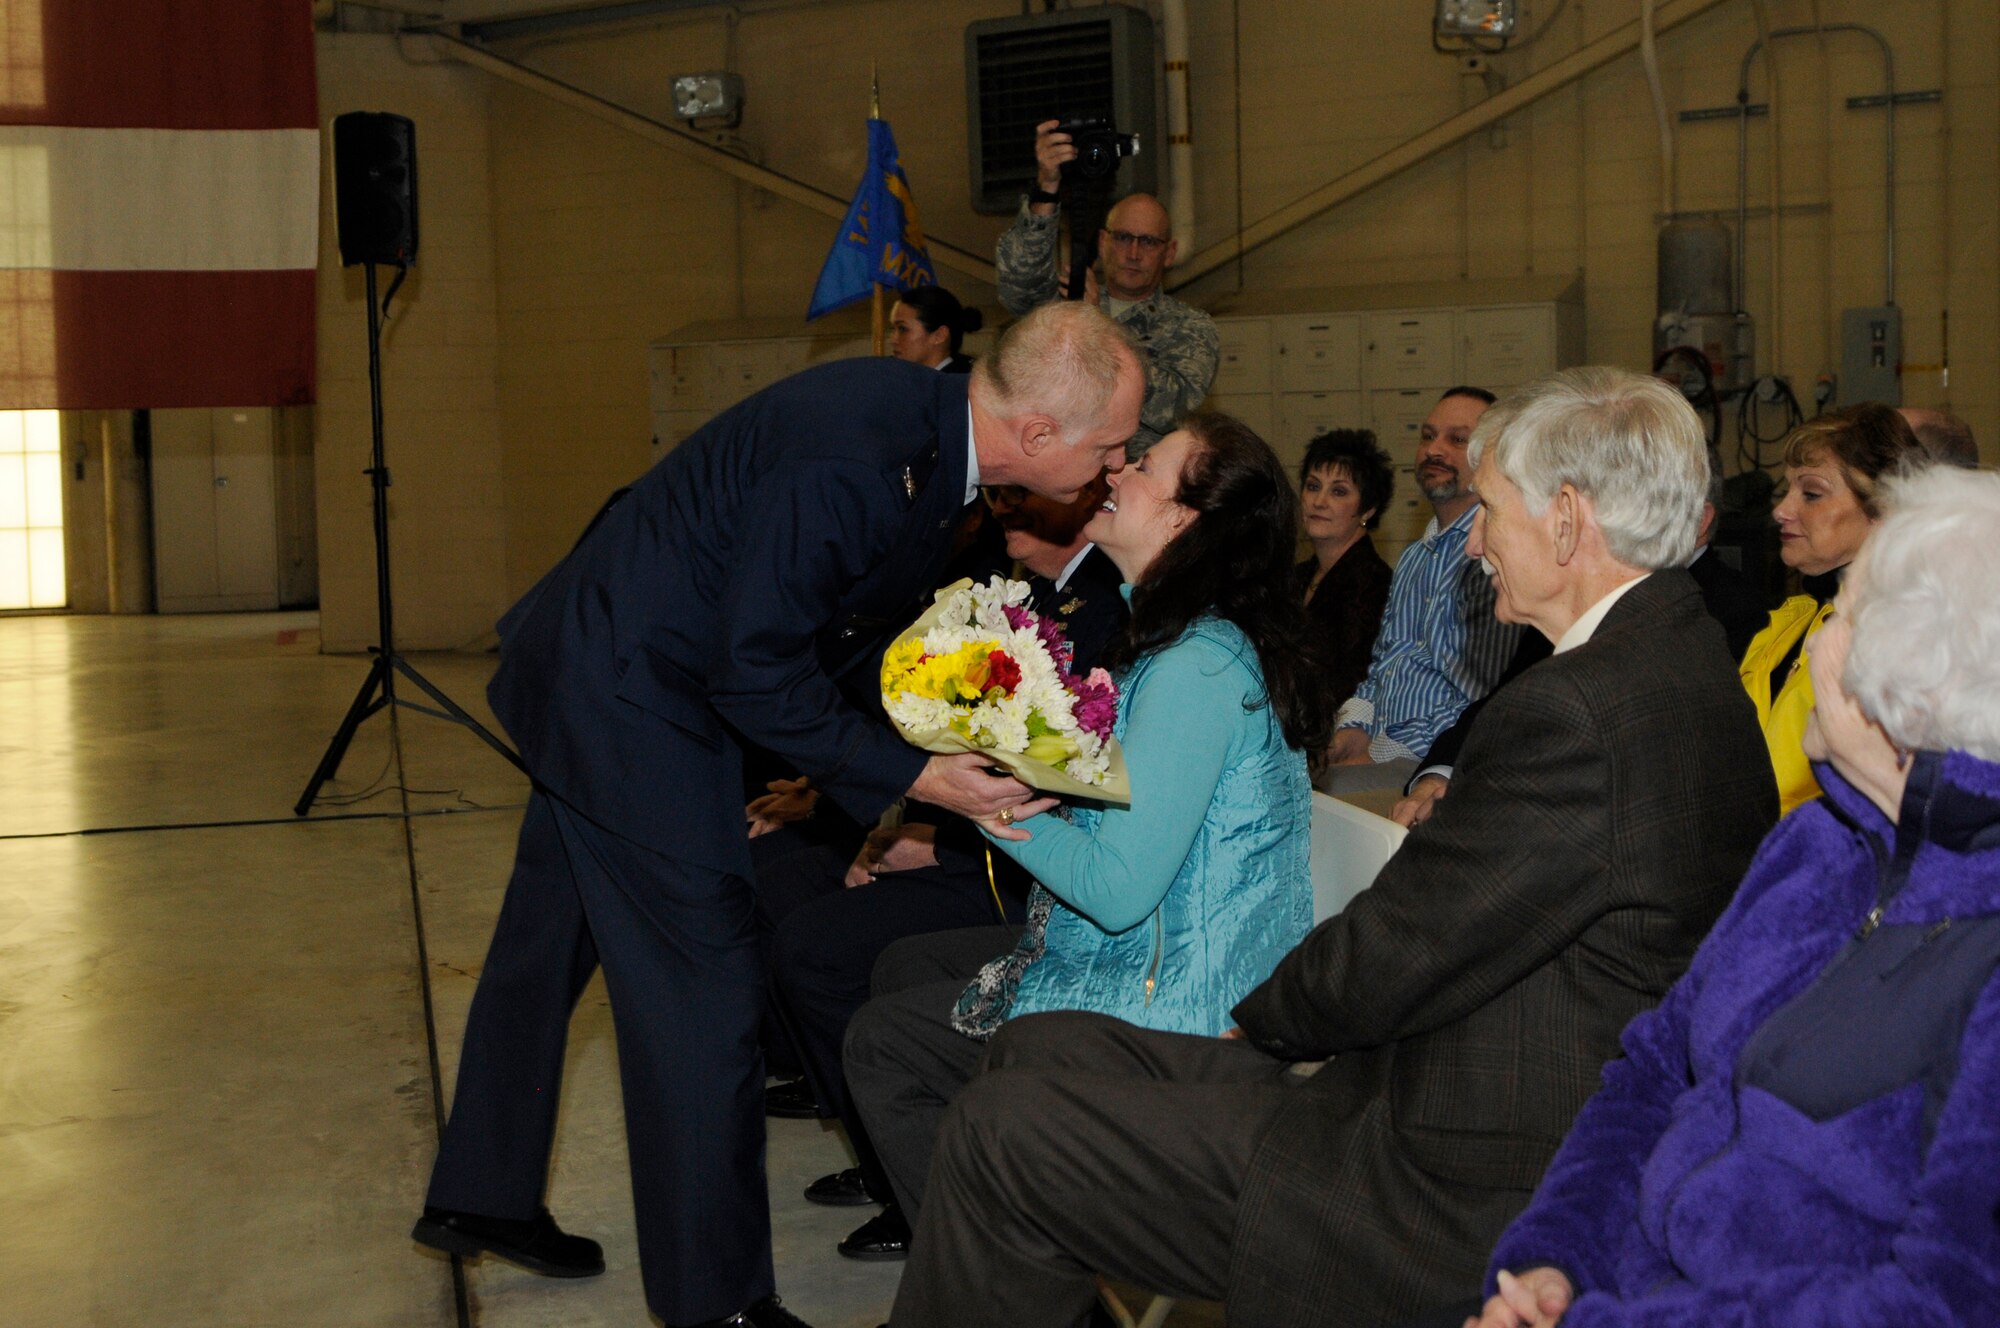 U.S. Air Force Col. Allan R. Cecil, commander, 145th Maintenance Group, presents a bouquet of flowers to his spouse during his Change of Command and promotion ceremony held at the North Carolina Air National Guard Base, Charlotte Douglas International Airport, Jan. 9, 2016. During his speech Cecil thanked his mentors and his spouse for their guidance throughout his career. (U.S. Air National Guard photo by Staff Sgt. Julianne M. Showalter /Released)